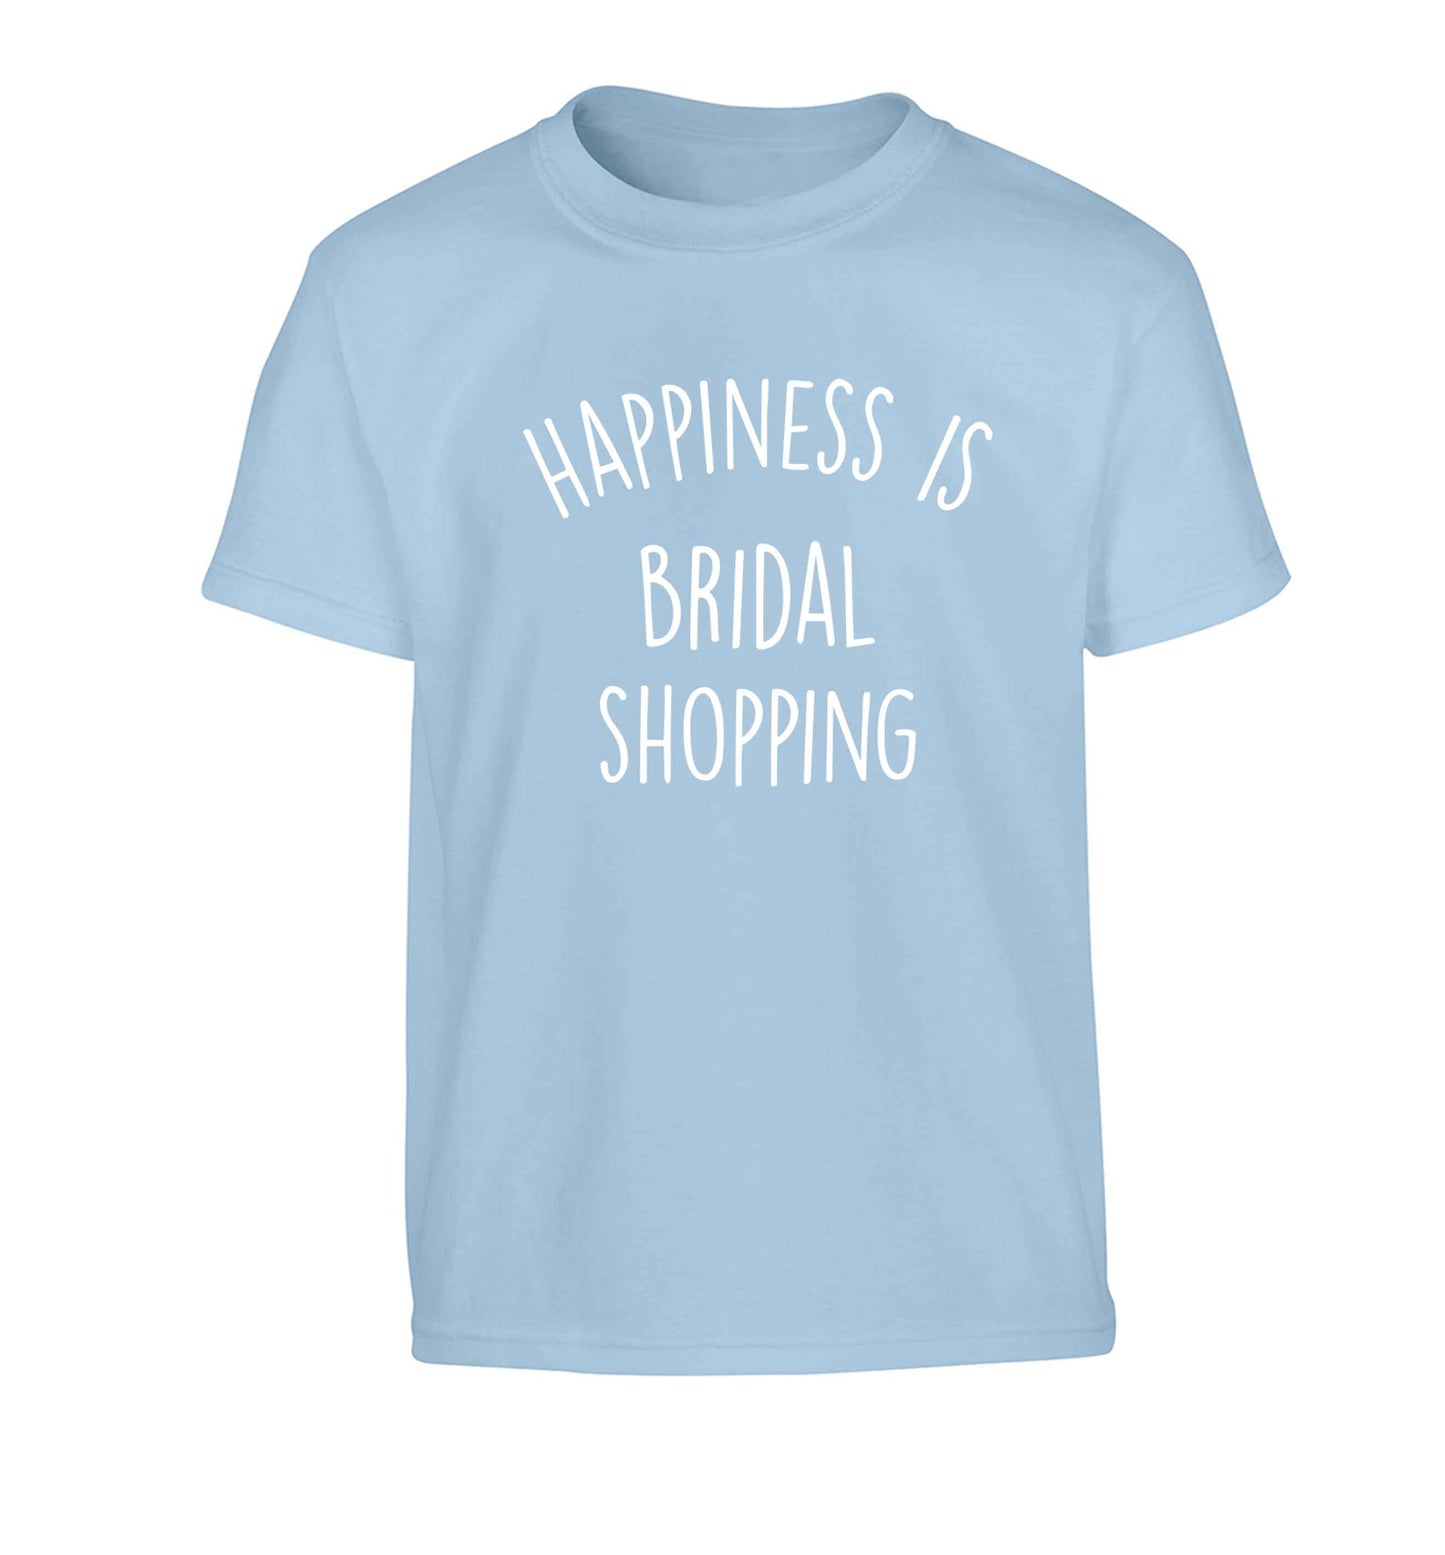 Happiness is bridal shopping Children's light blue Tshirt 12-13 Years